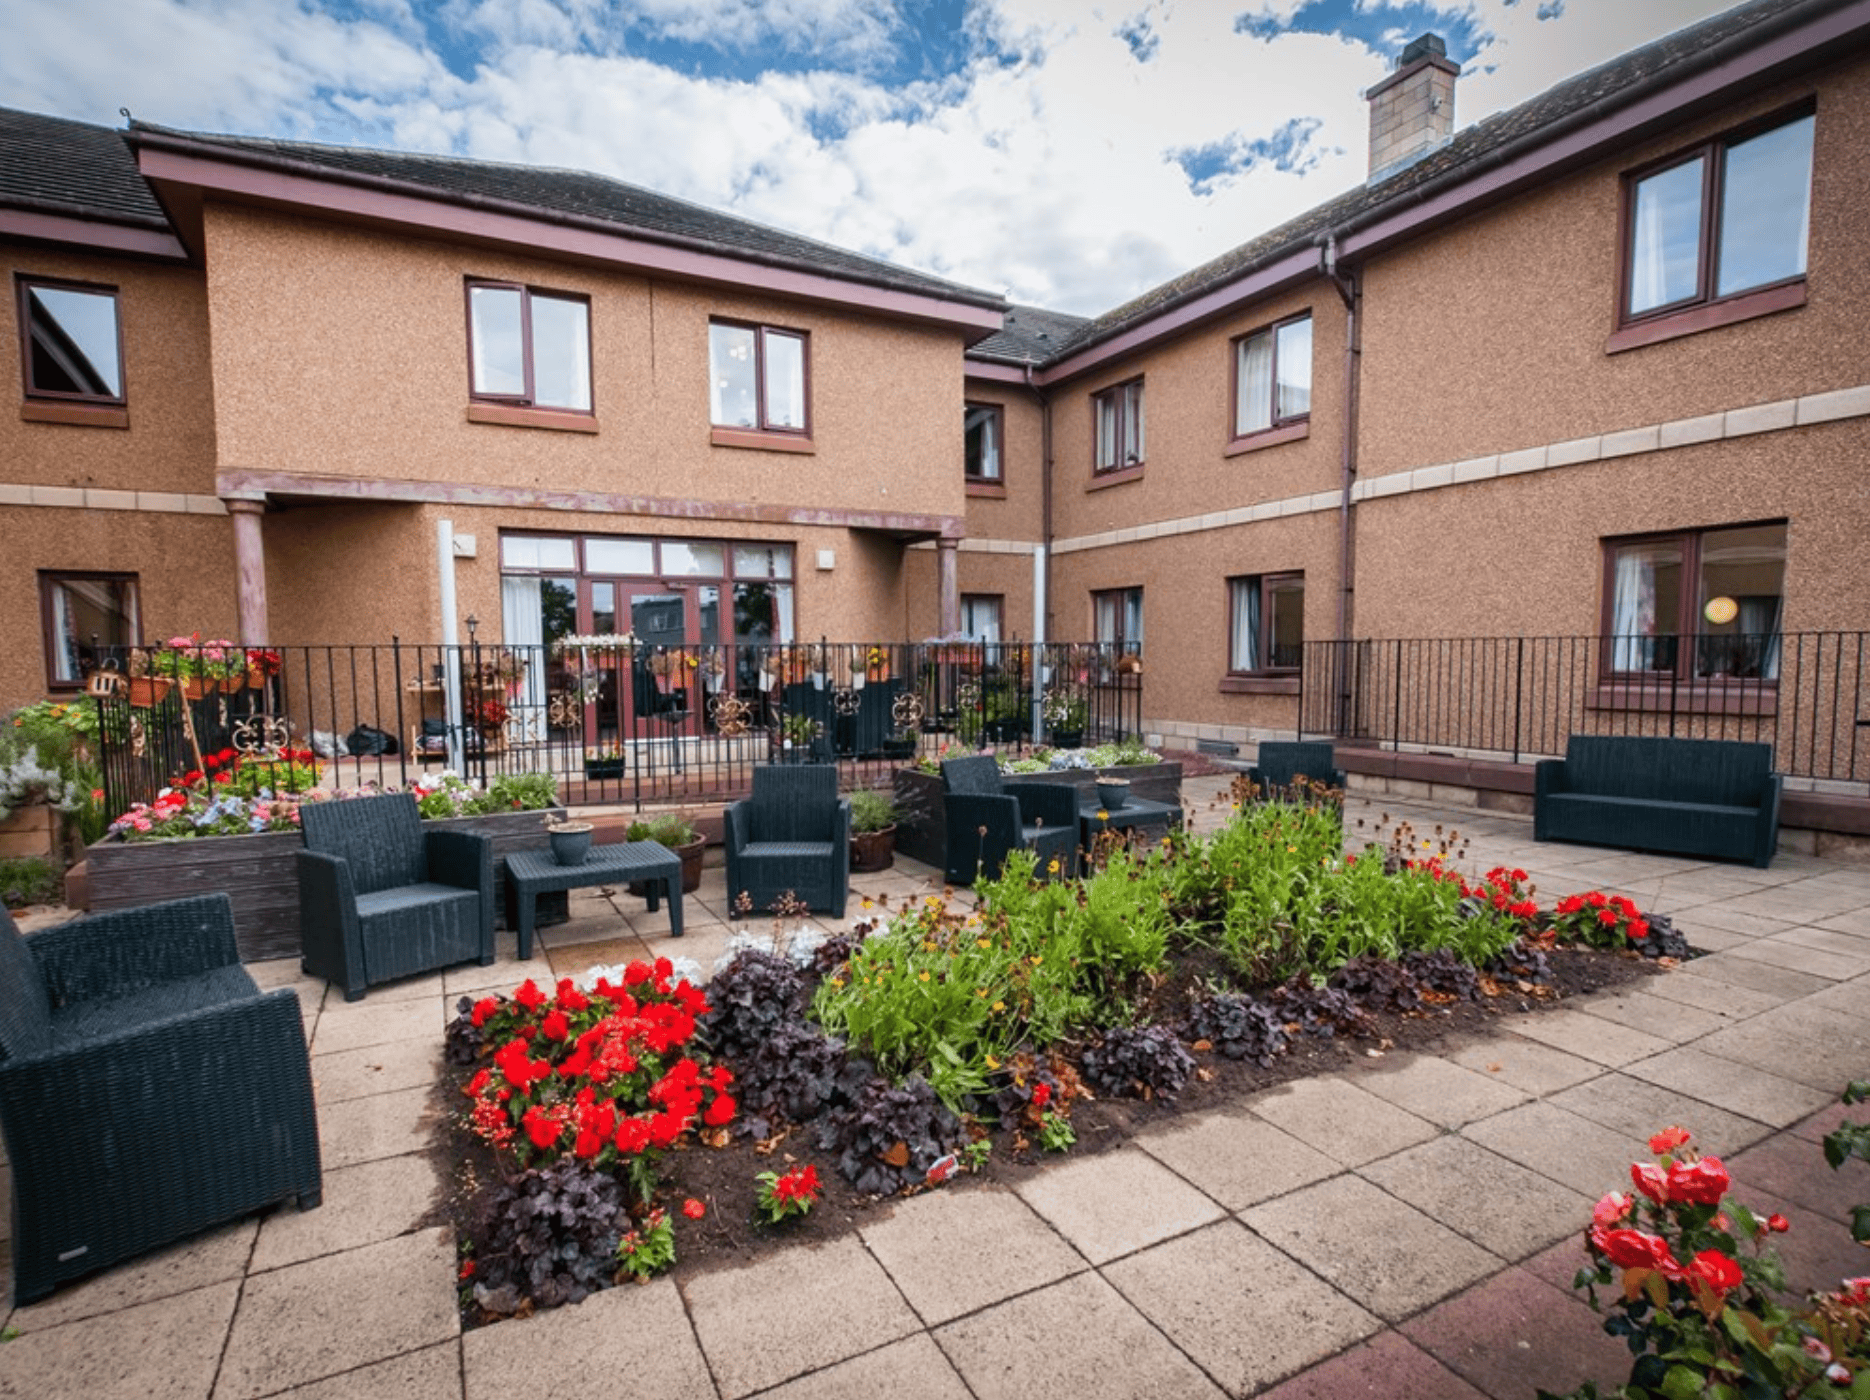 Garden at Leven Beach Care Home in Leven, Fife